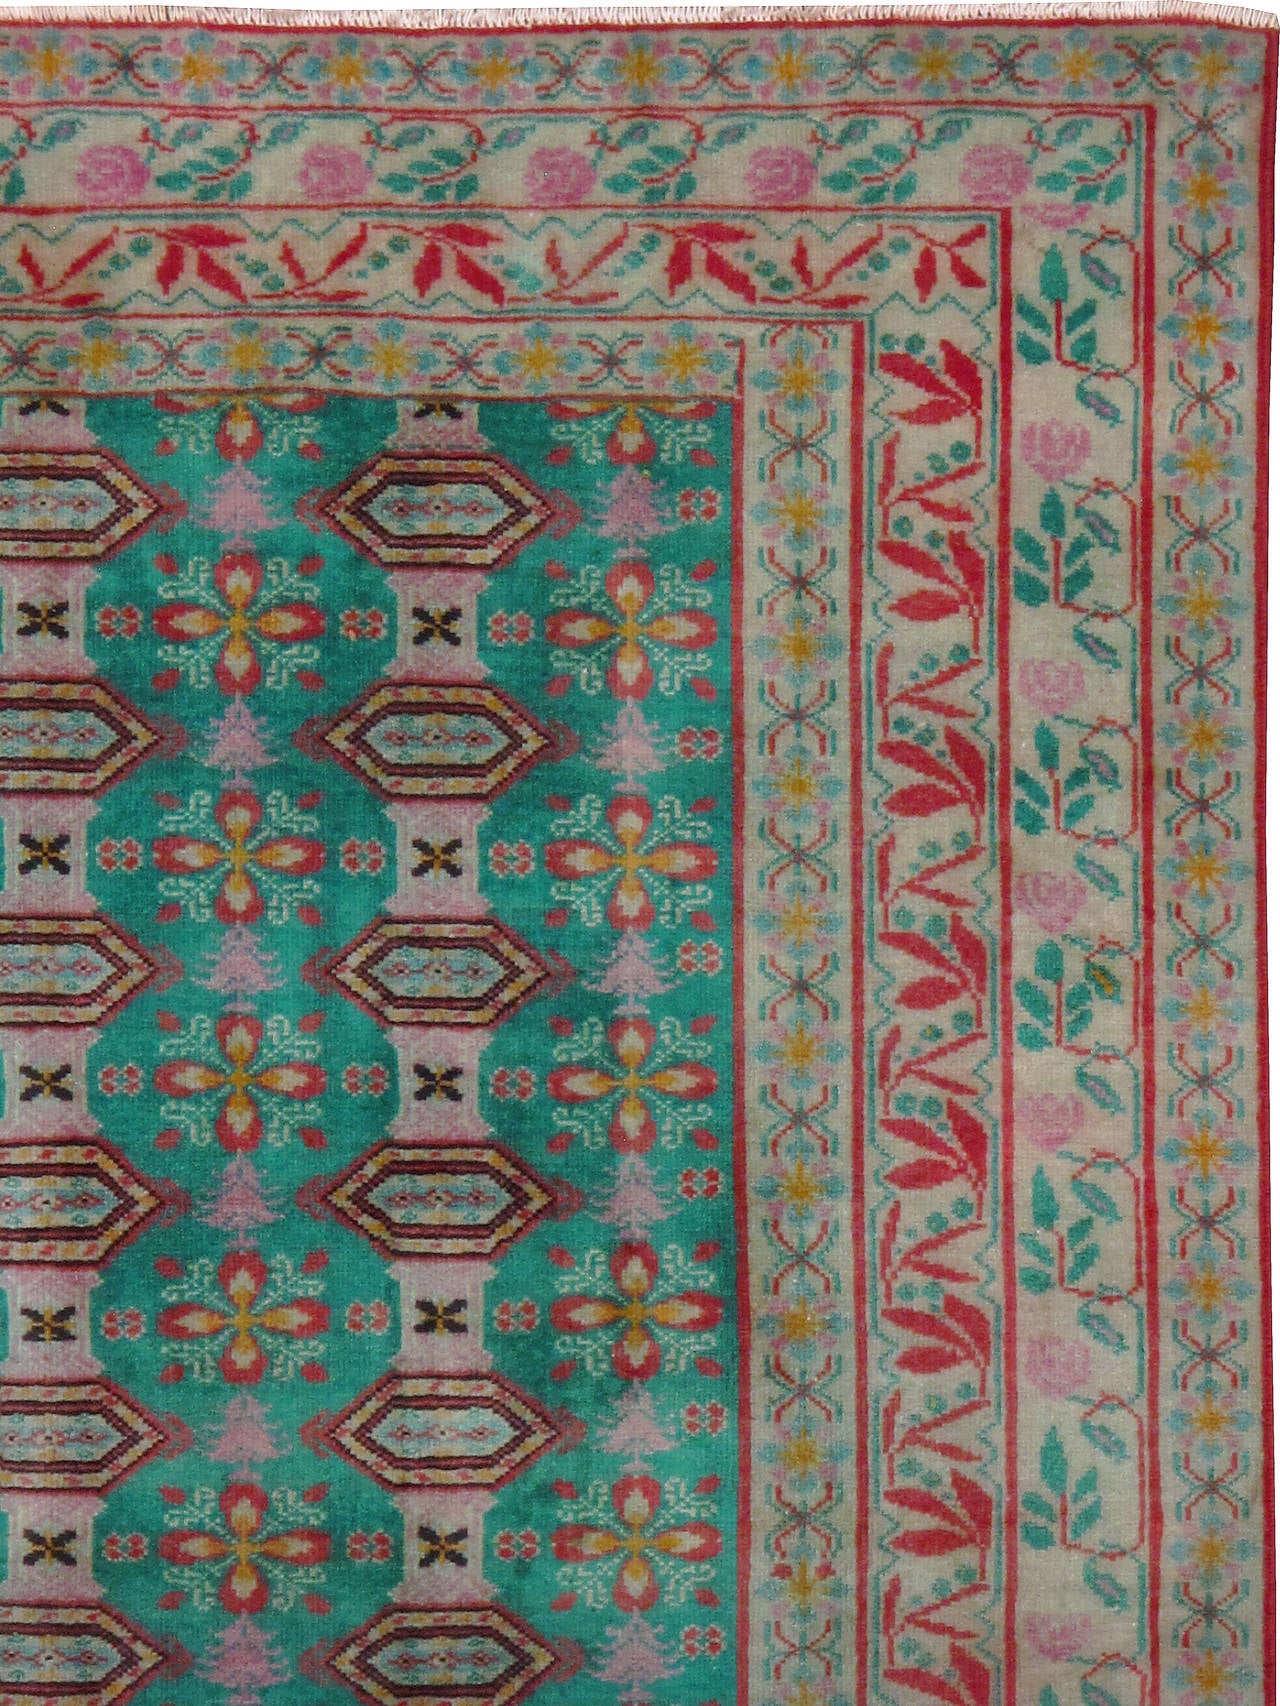 A vintage Central Asian Turkoman carpet from the second quarter of the 20th century.